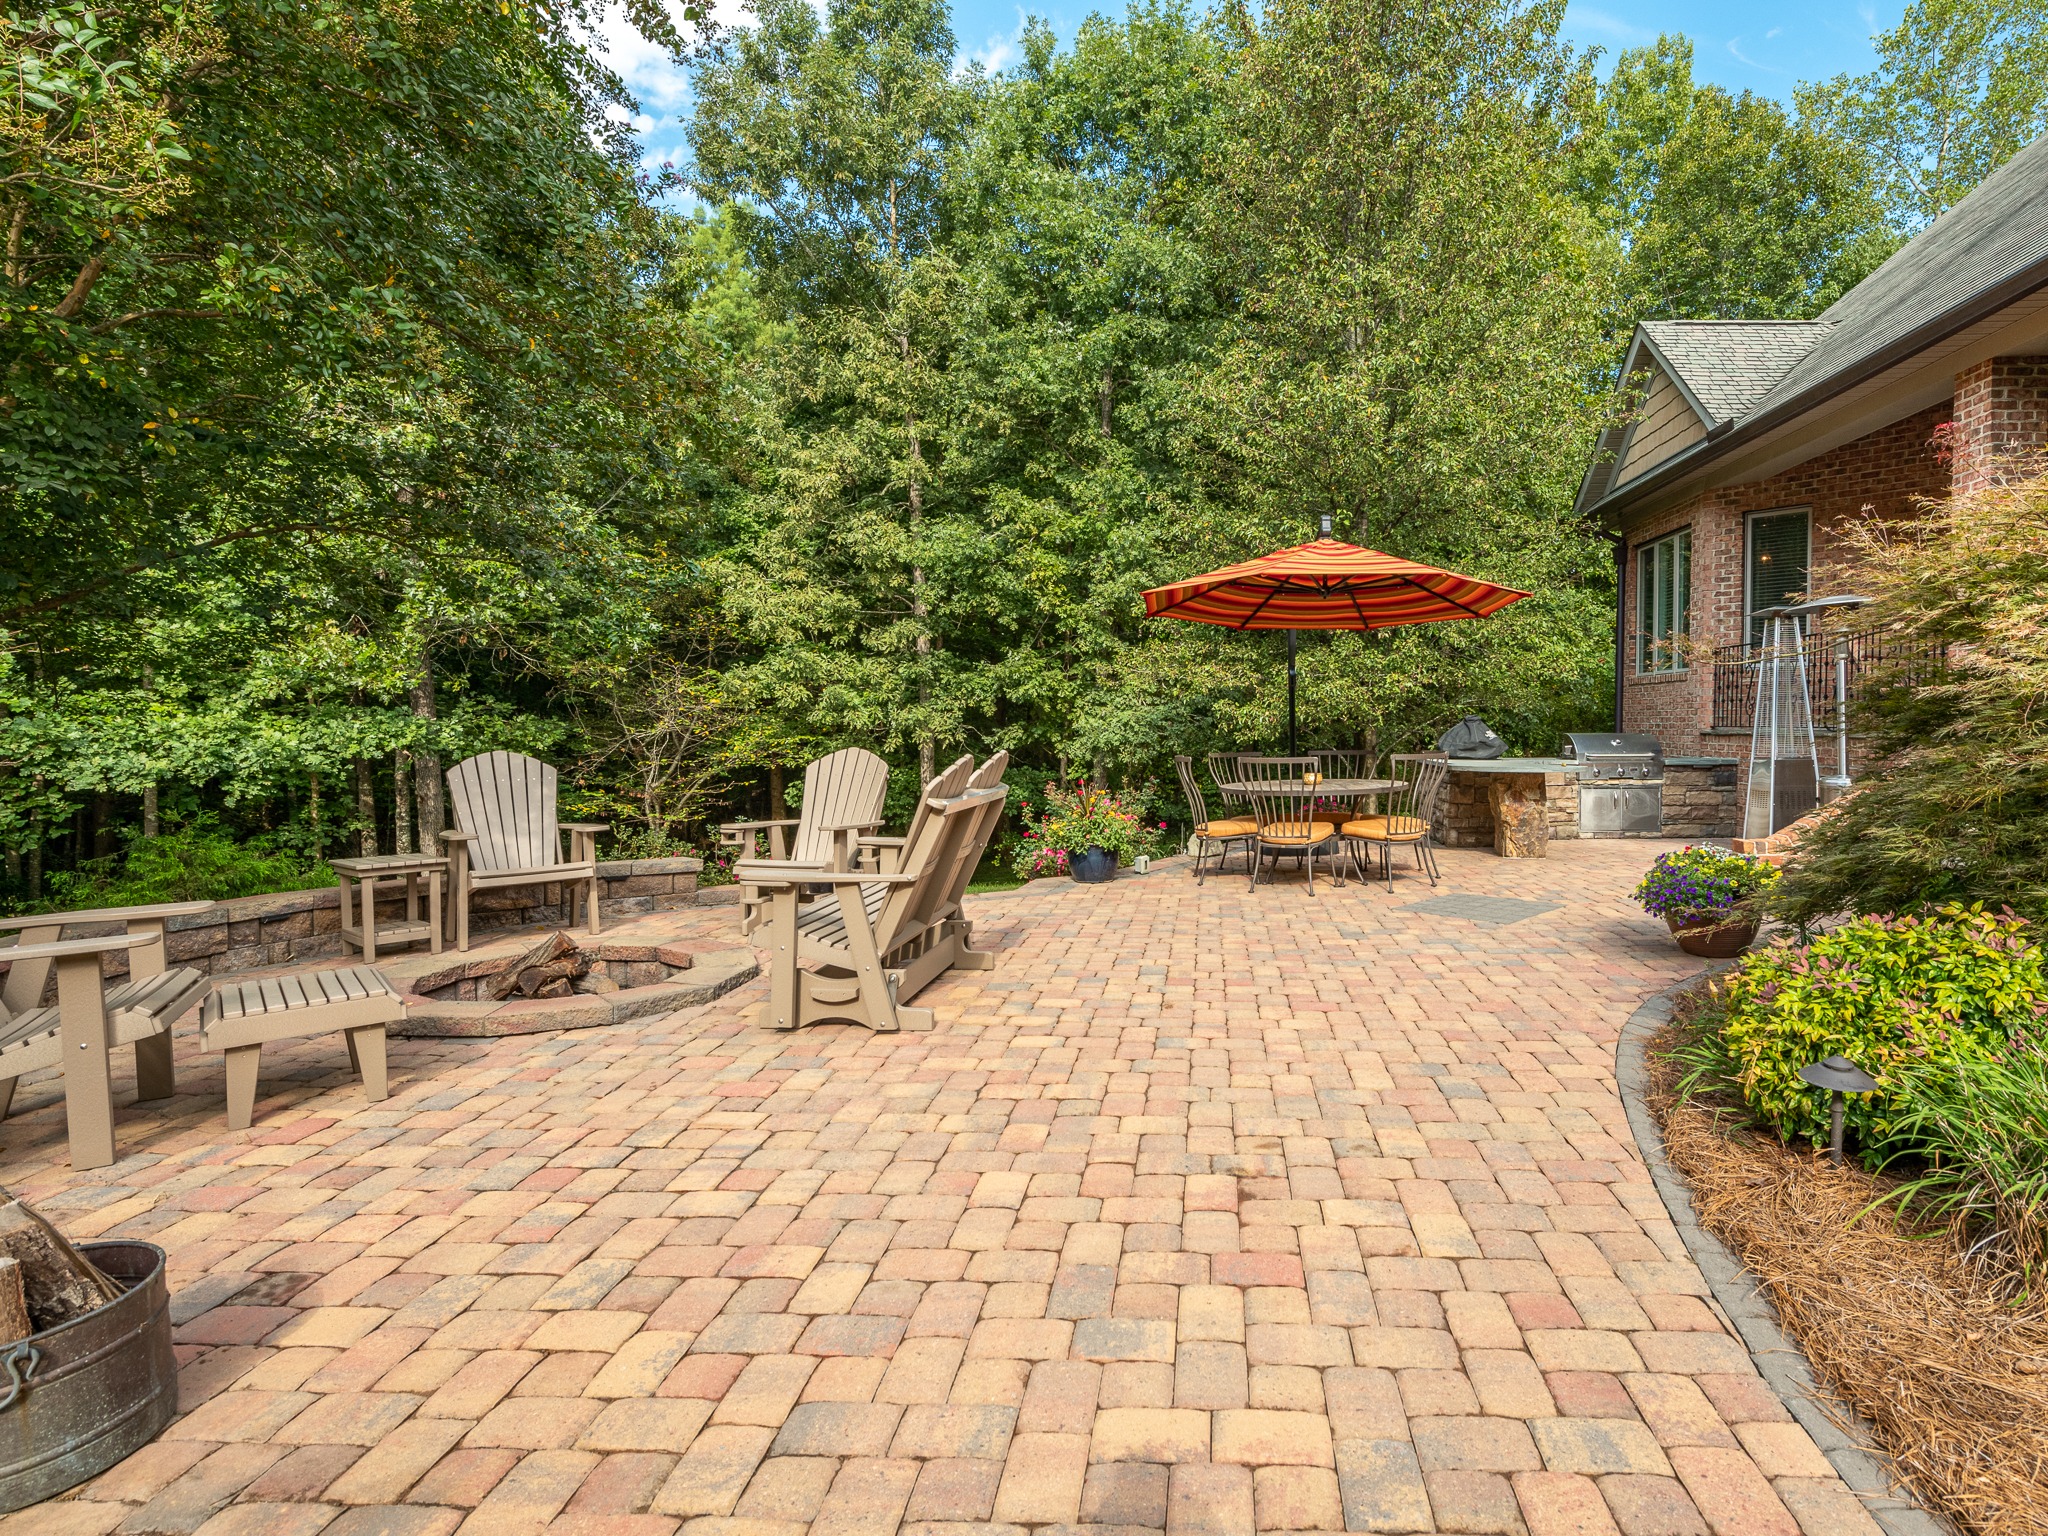 Big  paver patio with firepit